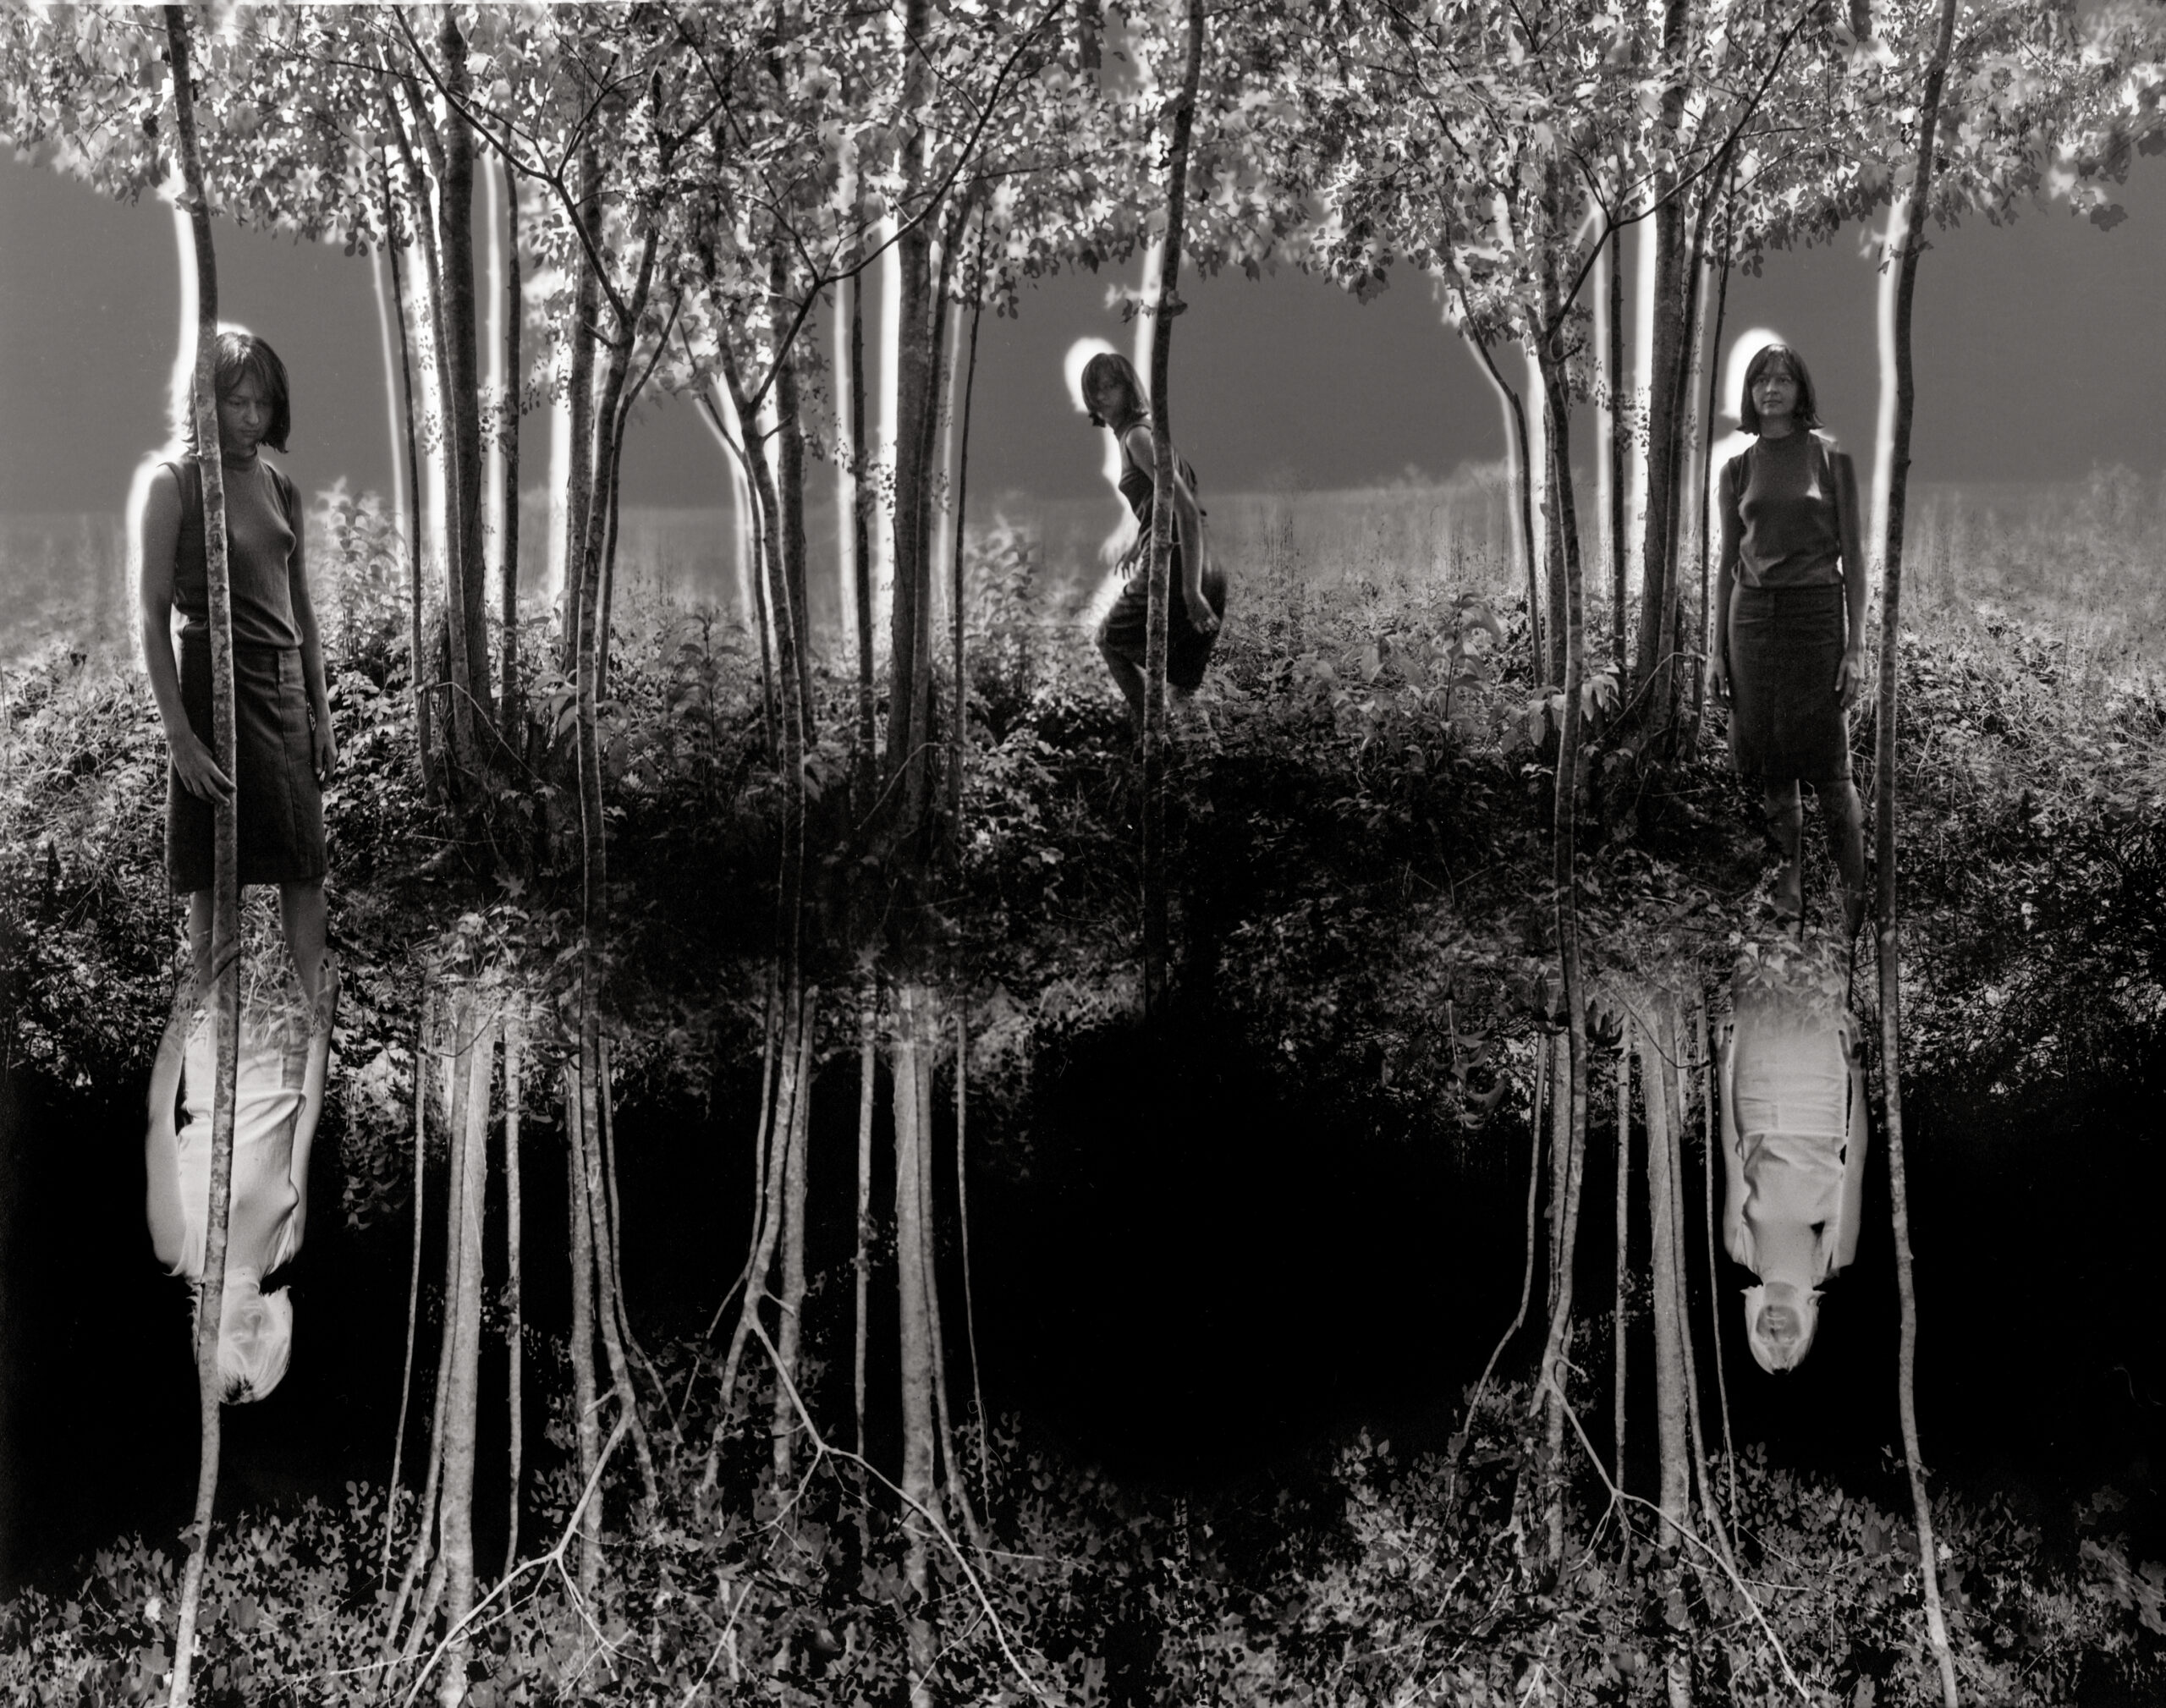 Jerry Uelsmann, The Artist Who Turned Photography Upside Down